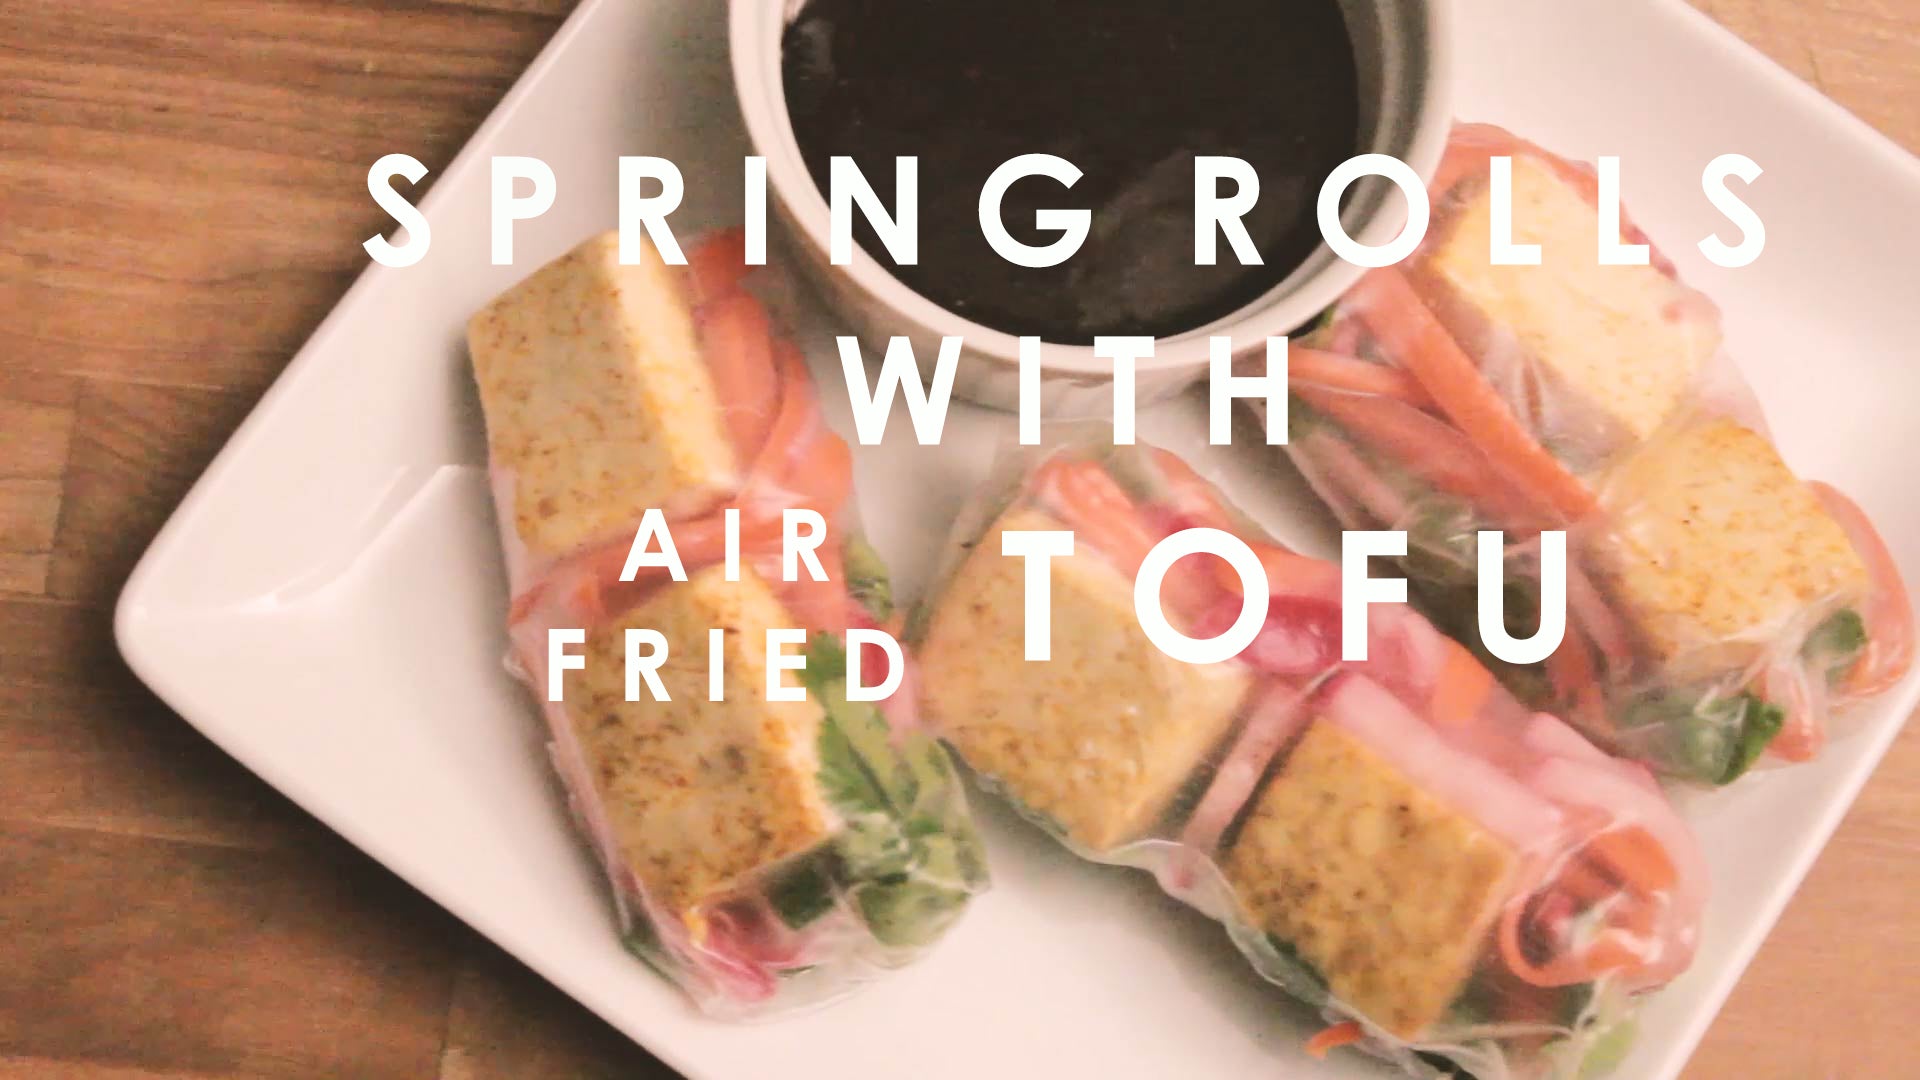 Spring Rolls with Air Fried Tofu